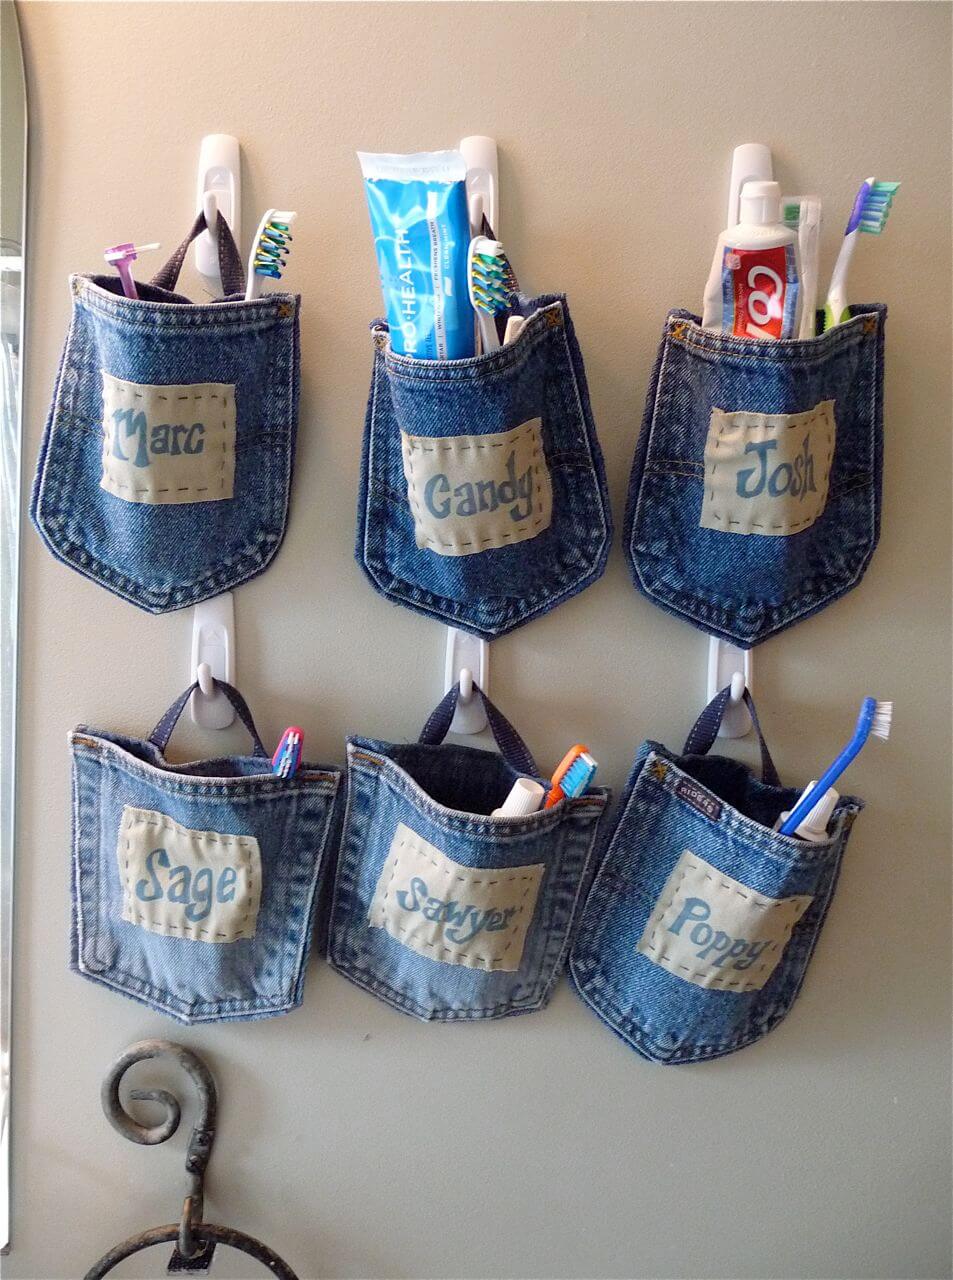 15 Genius DIY Denim Projects You Can Make From Your Old Jeans